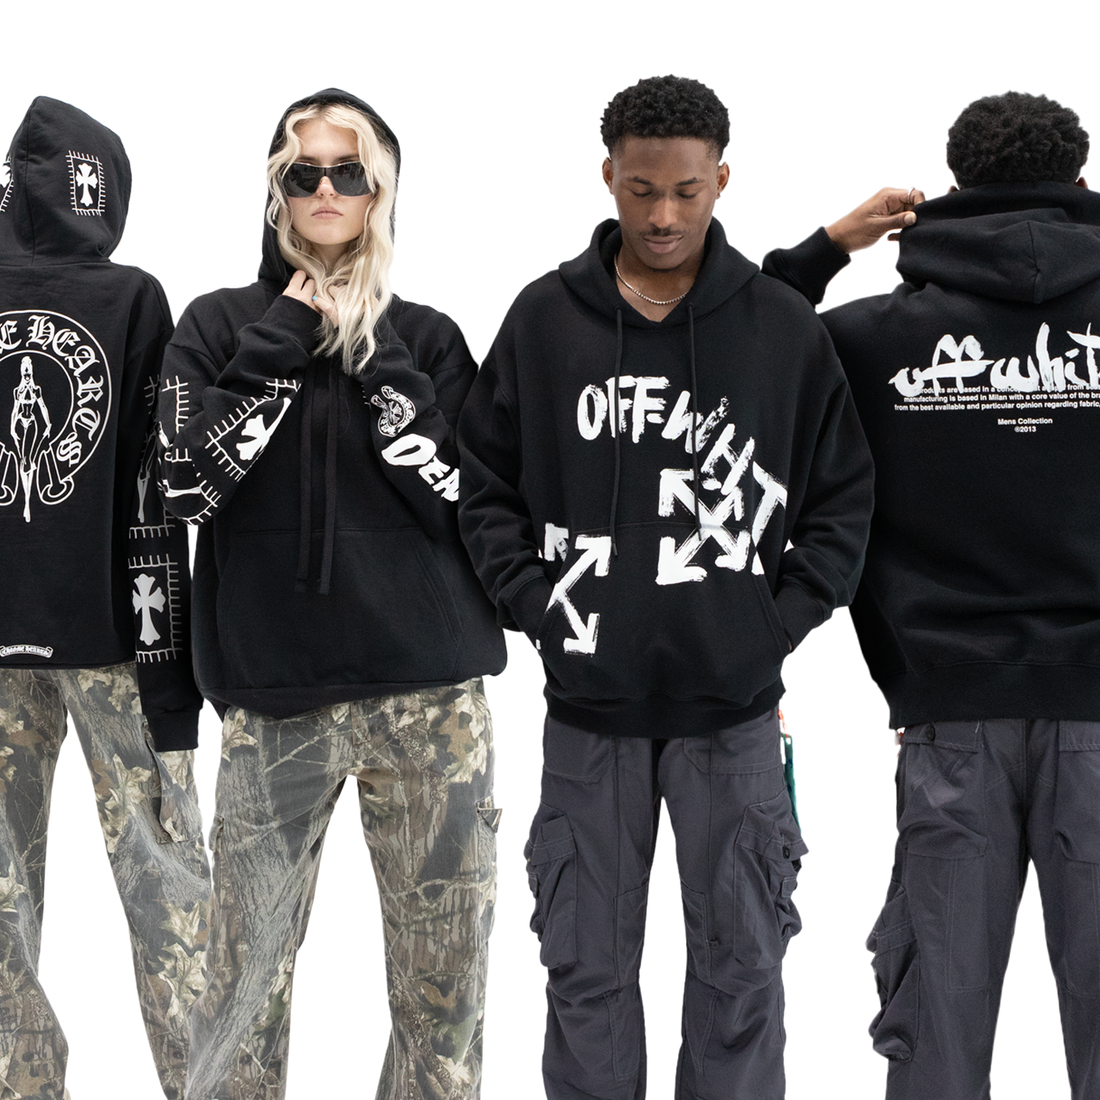 Restock AR Banner Featuring 4 Models Wearing Off-White Hoodies, Chrome Hearts Hoodies, and Hellstar Studios Collection.